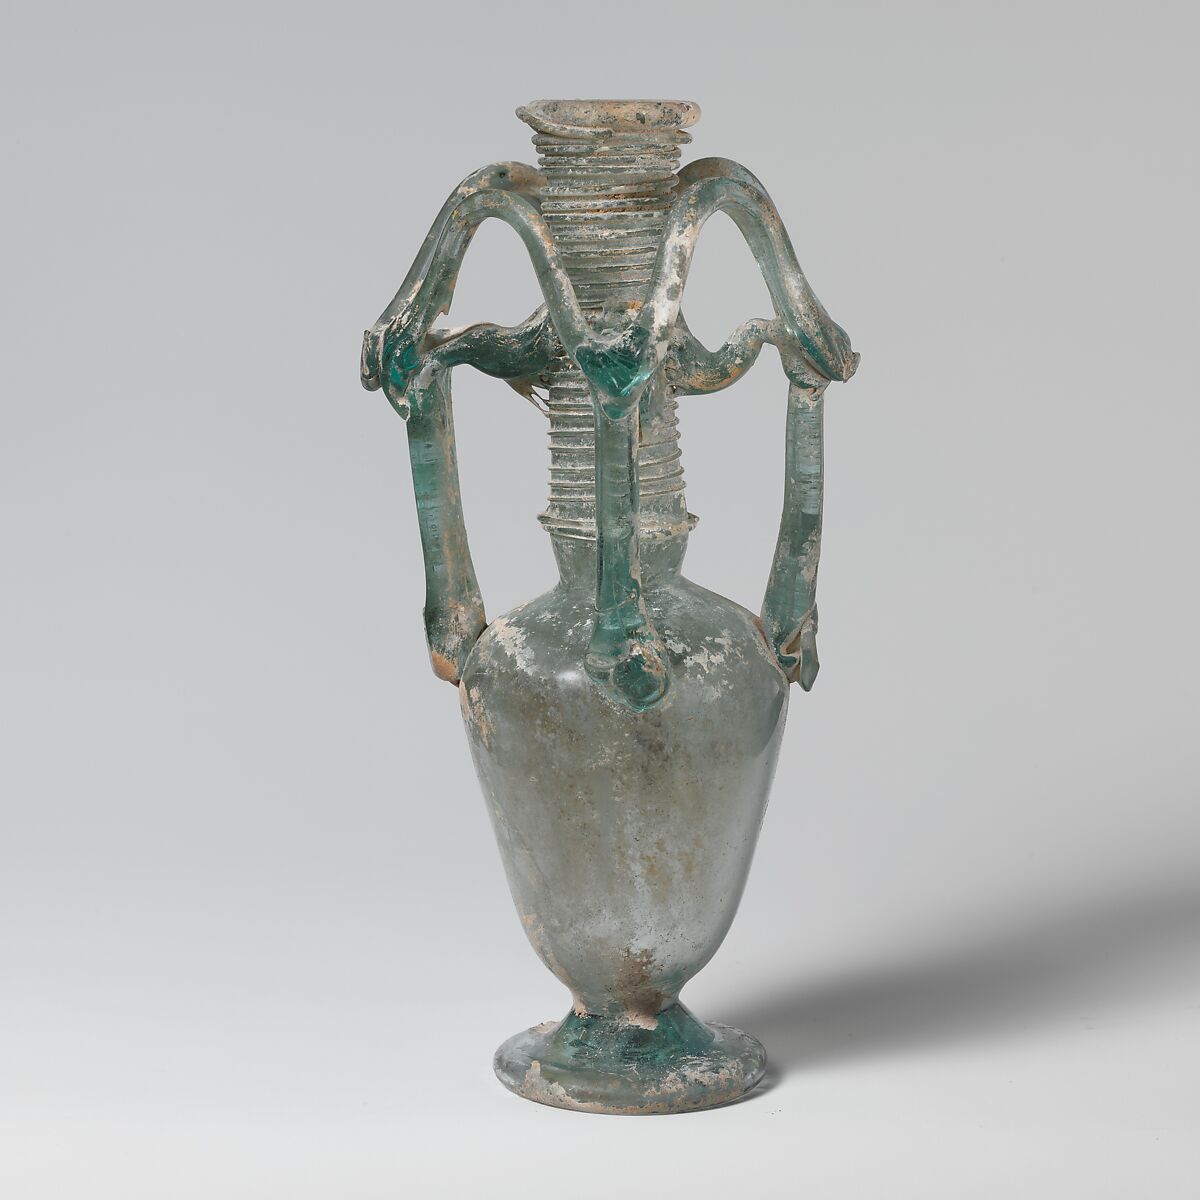 Glass flask with elaborate looped handles, Glass, Roman, Syrian 